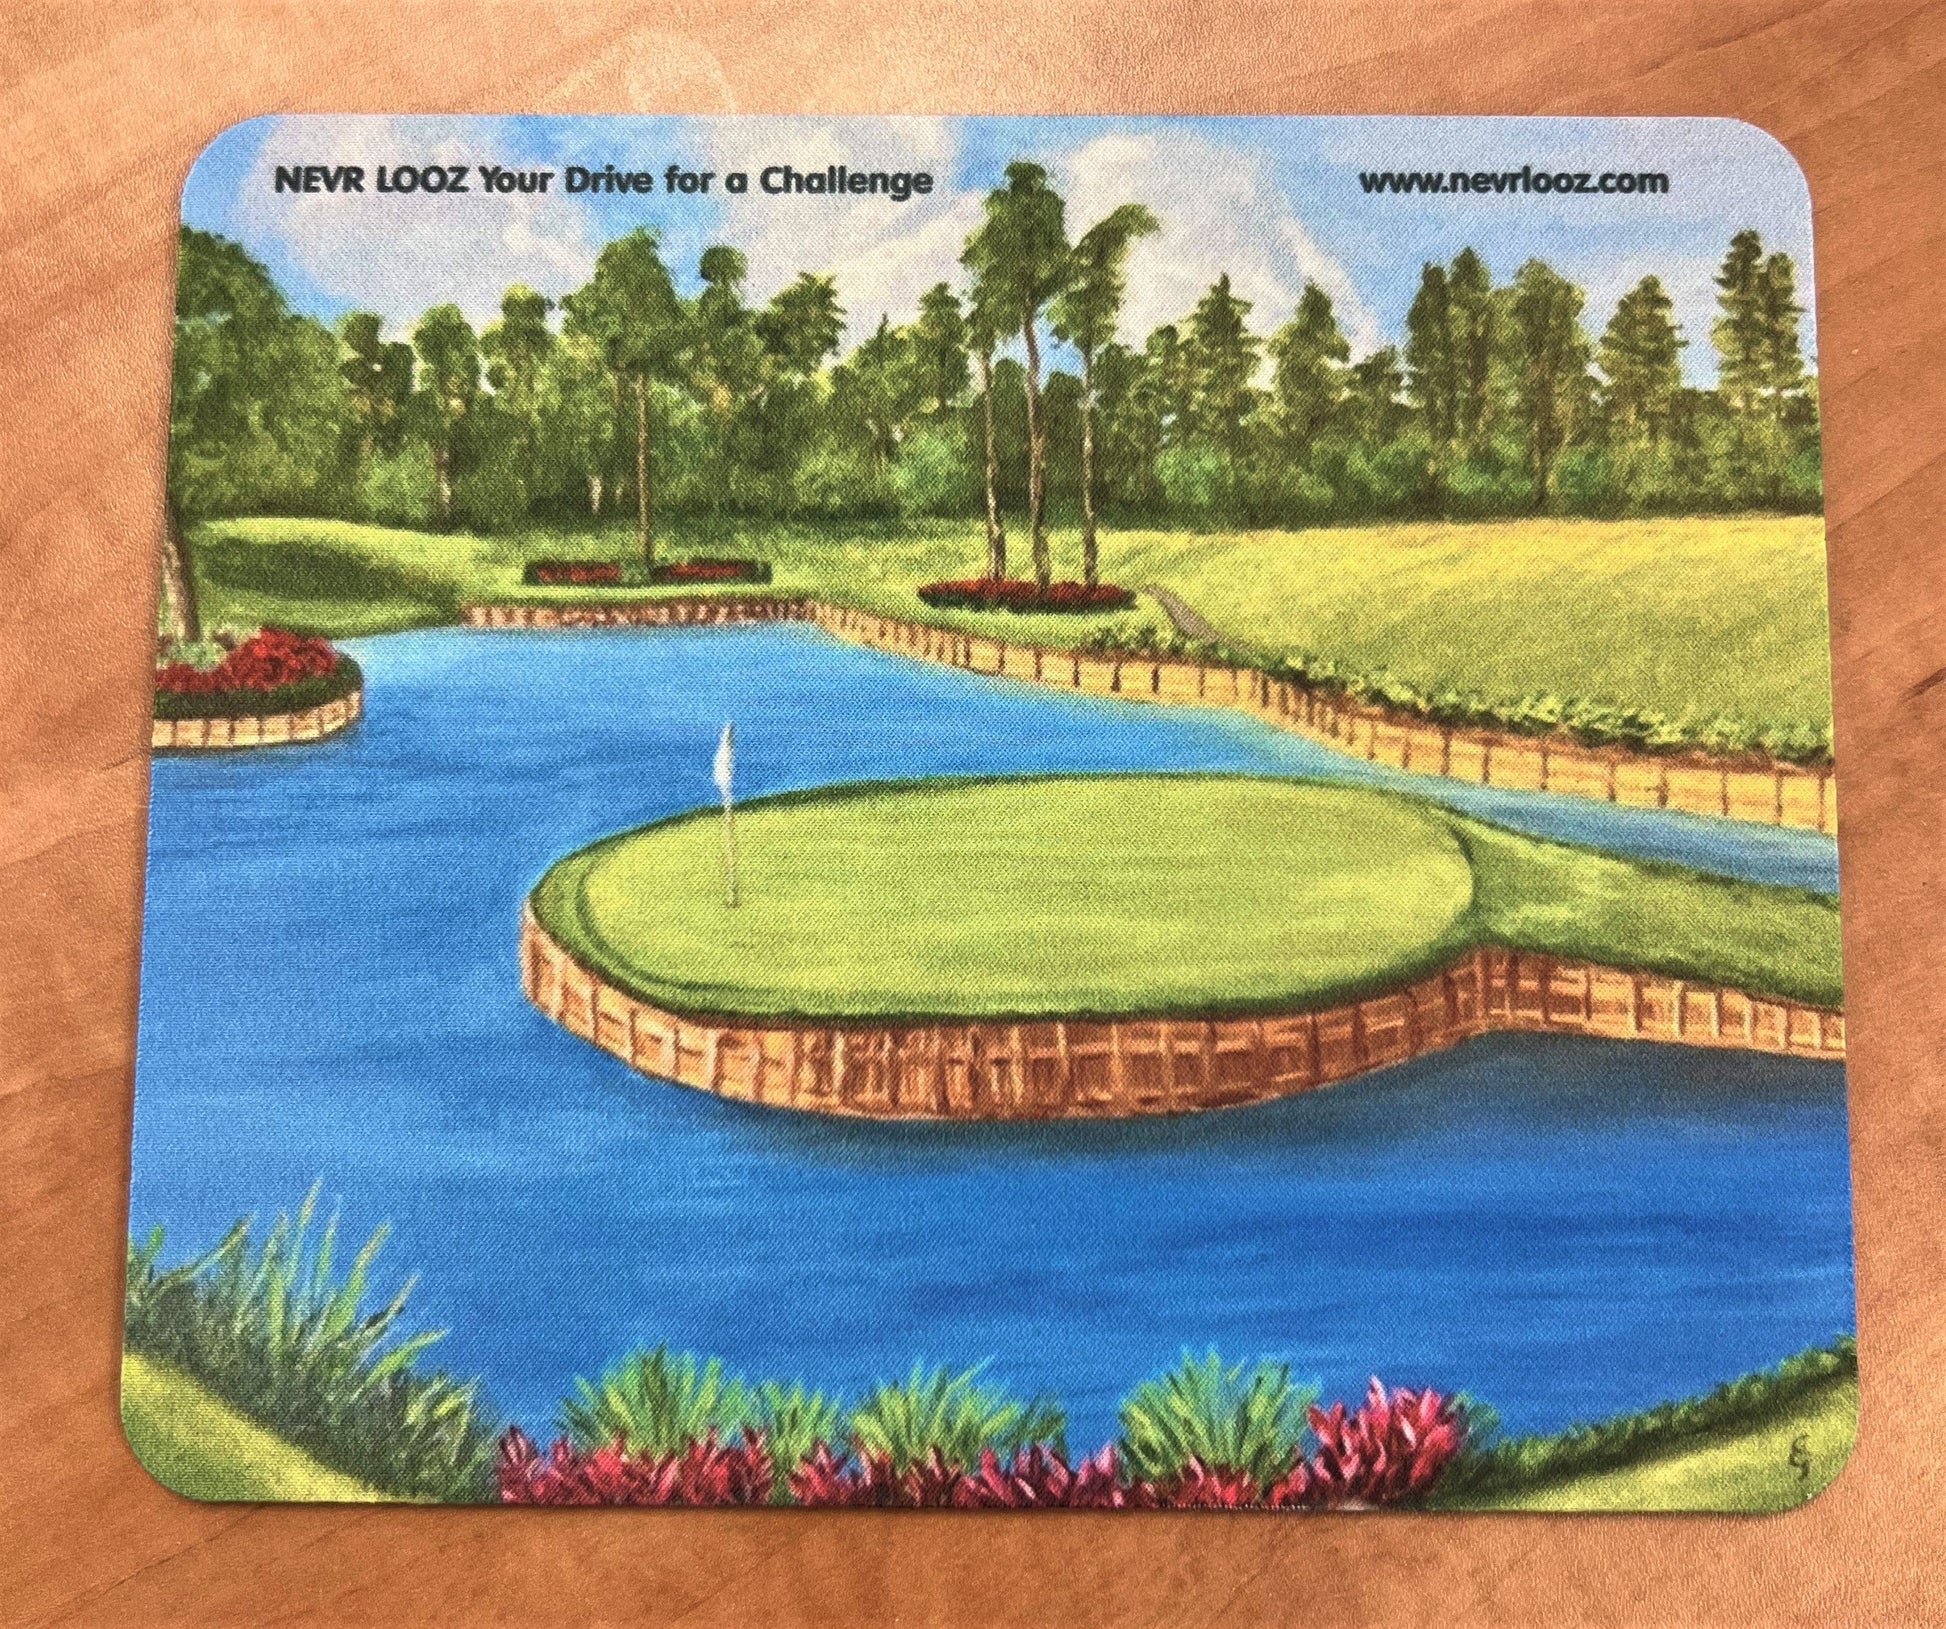 Mousepad featuring a print of the famous 17th hole at TPC Sawgrass, with a golf course, pond, and trees in a serene outdoor landscape.